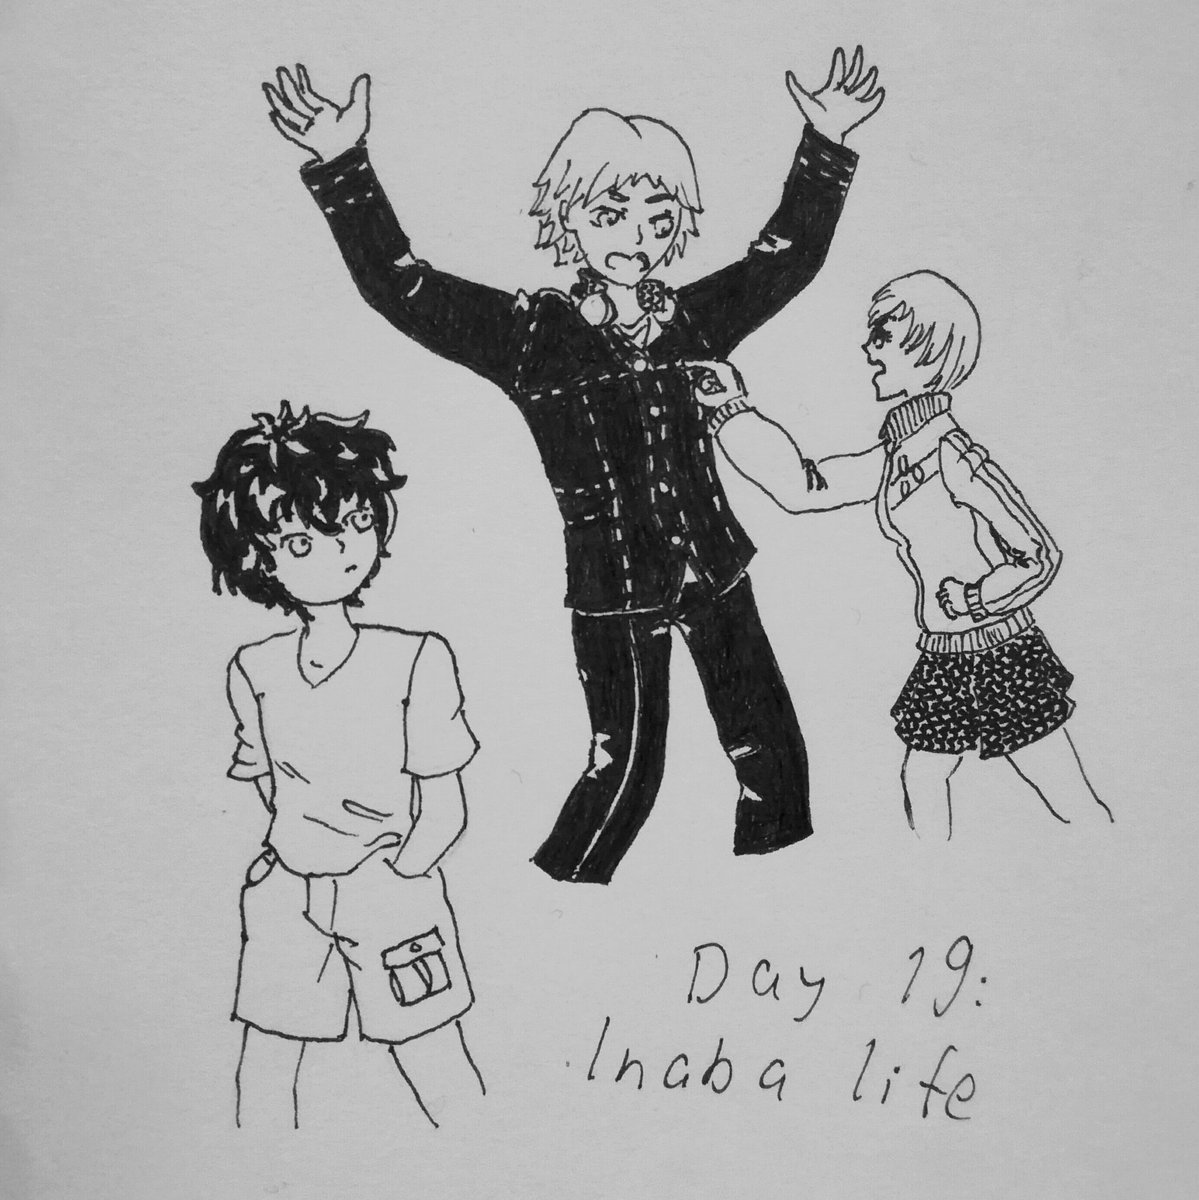 @shd15 #Inktober2019 #personactober

Listening to two of his friends argue a few years later, Akira couldn't help feeling a sense of familiarity.